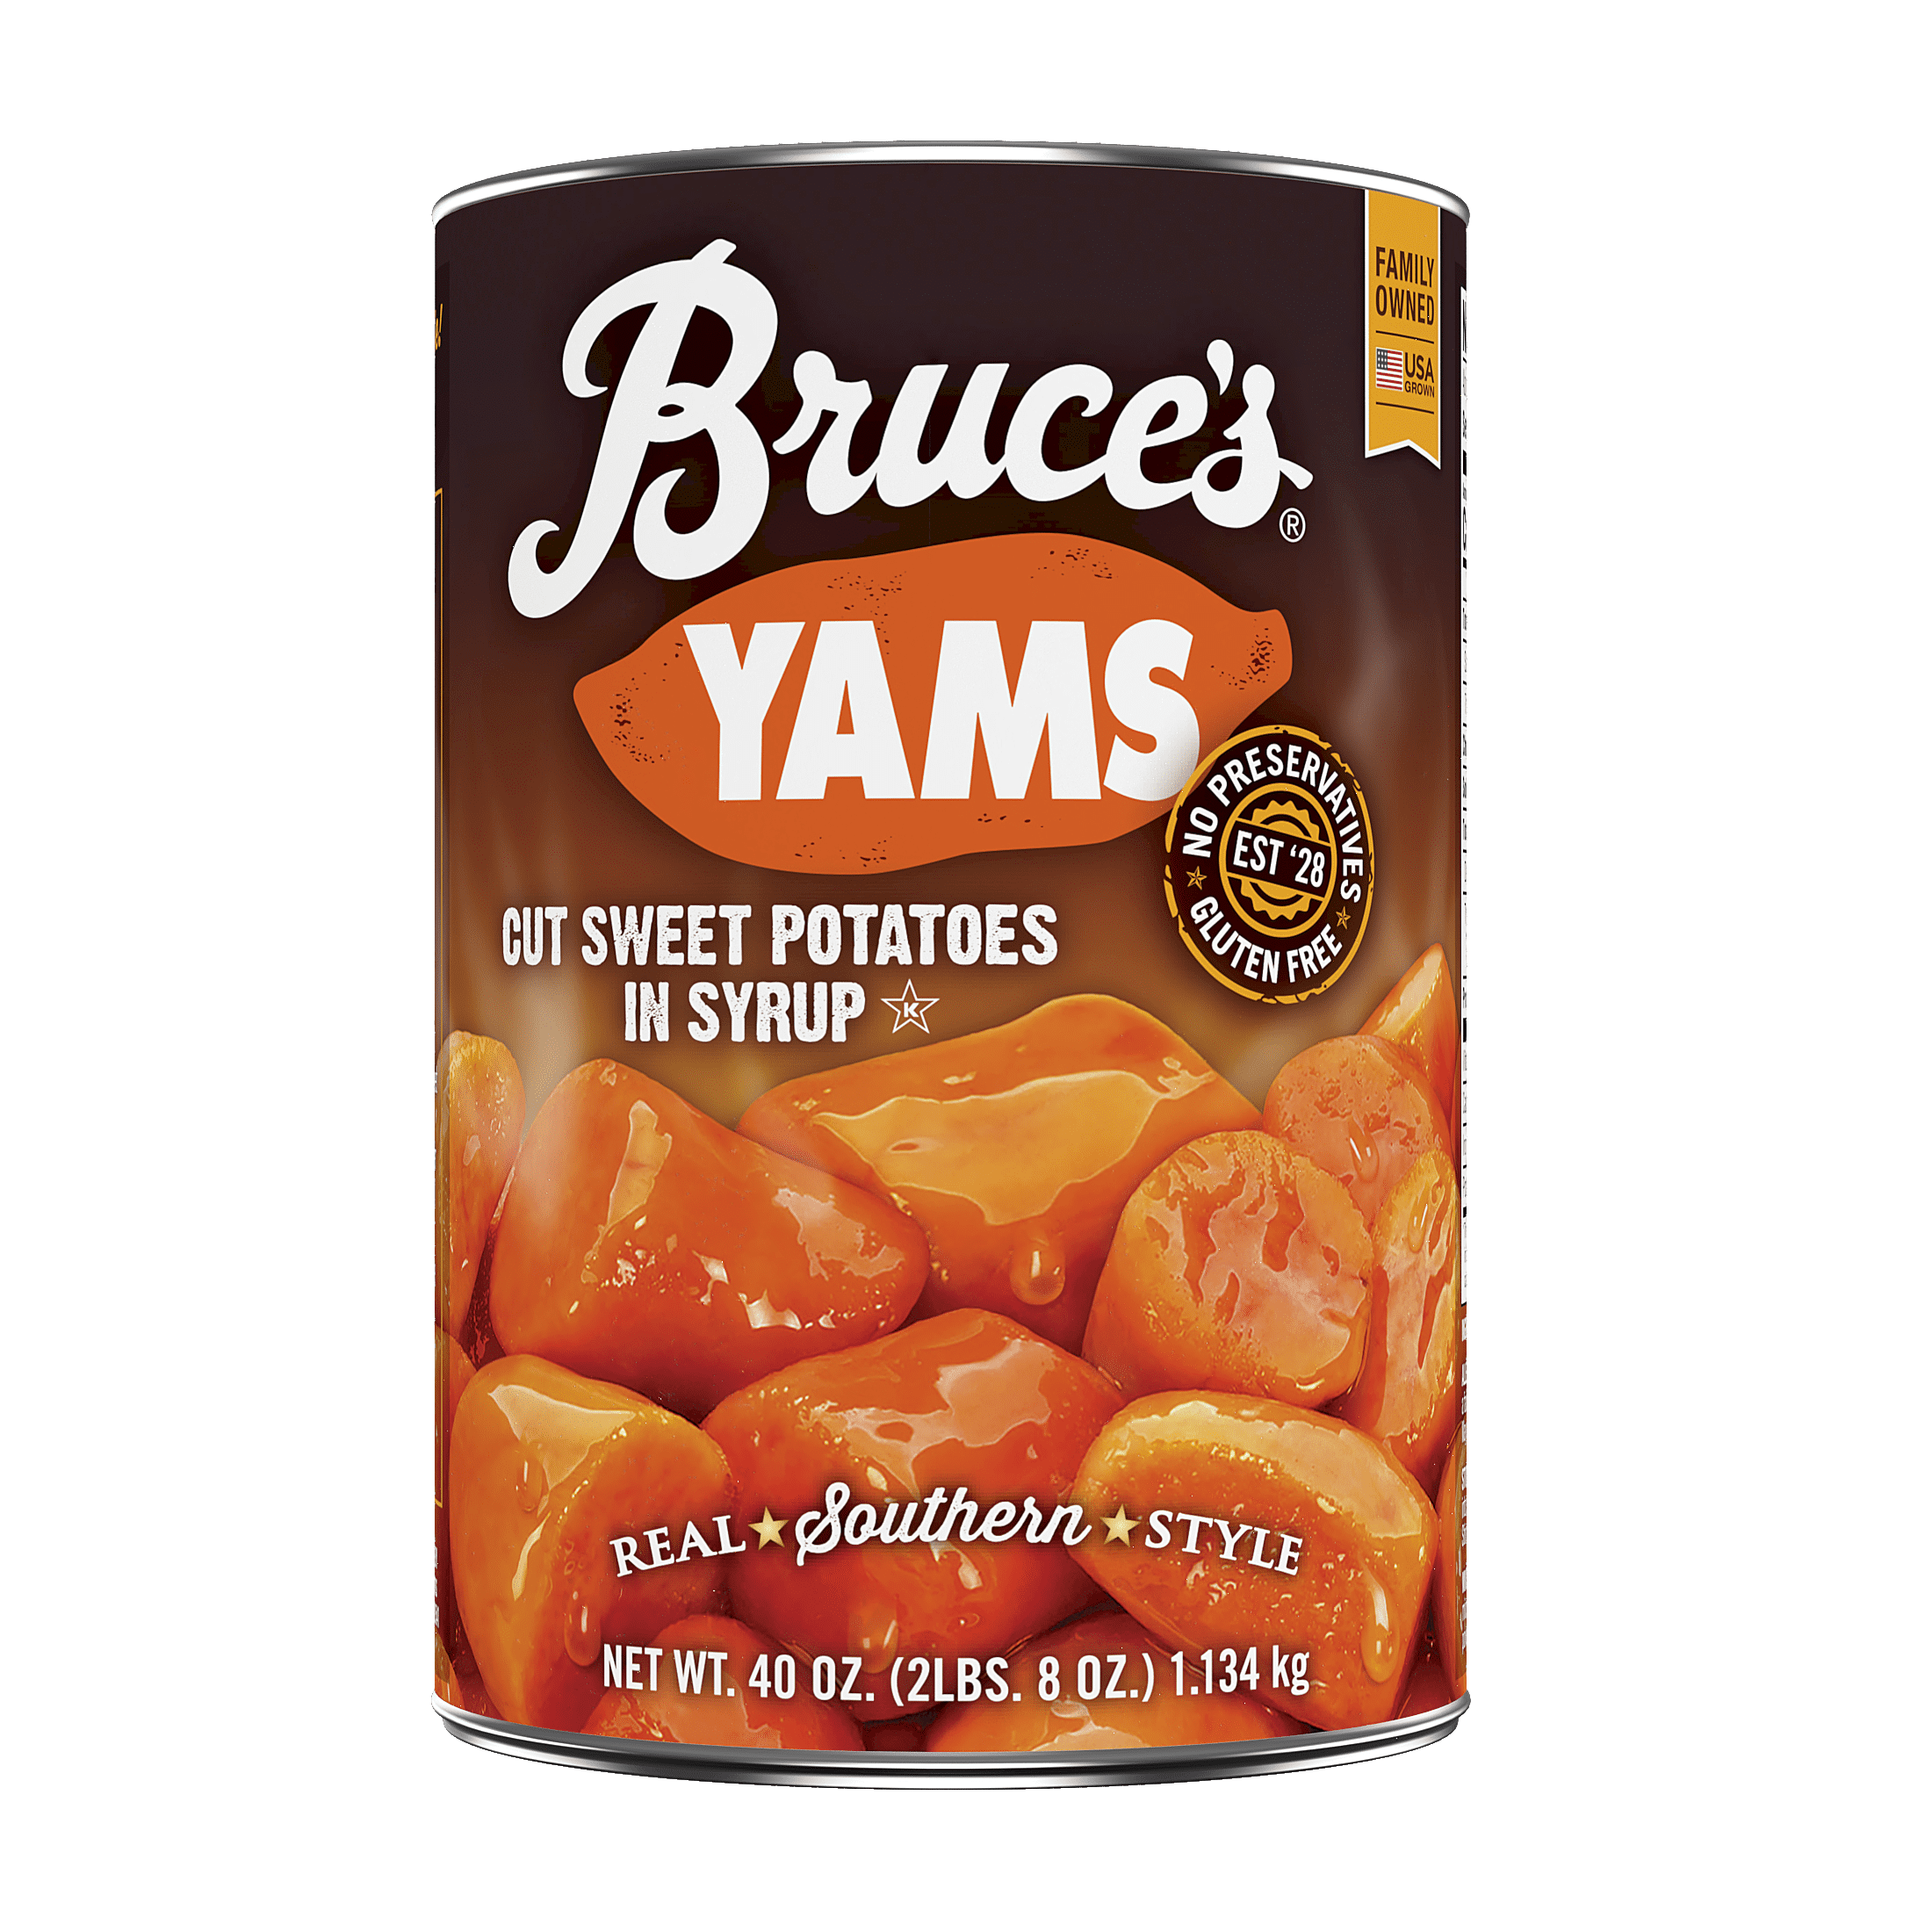 Bruce's Yams Cut Sweet Potatoes in Syrup, Canned Vegetables, 40 oz